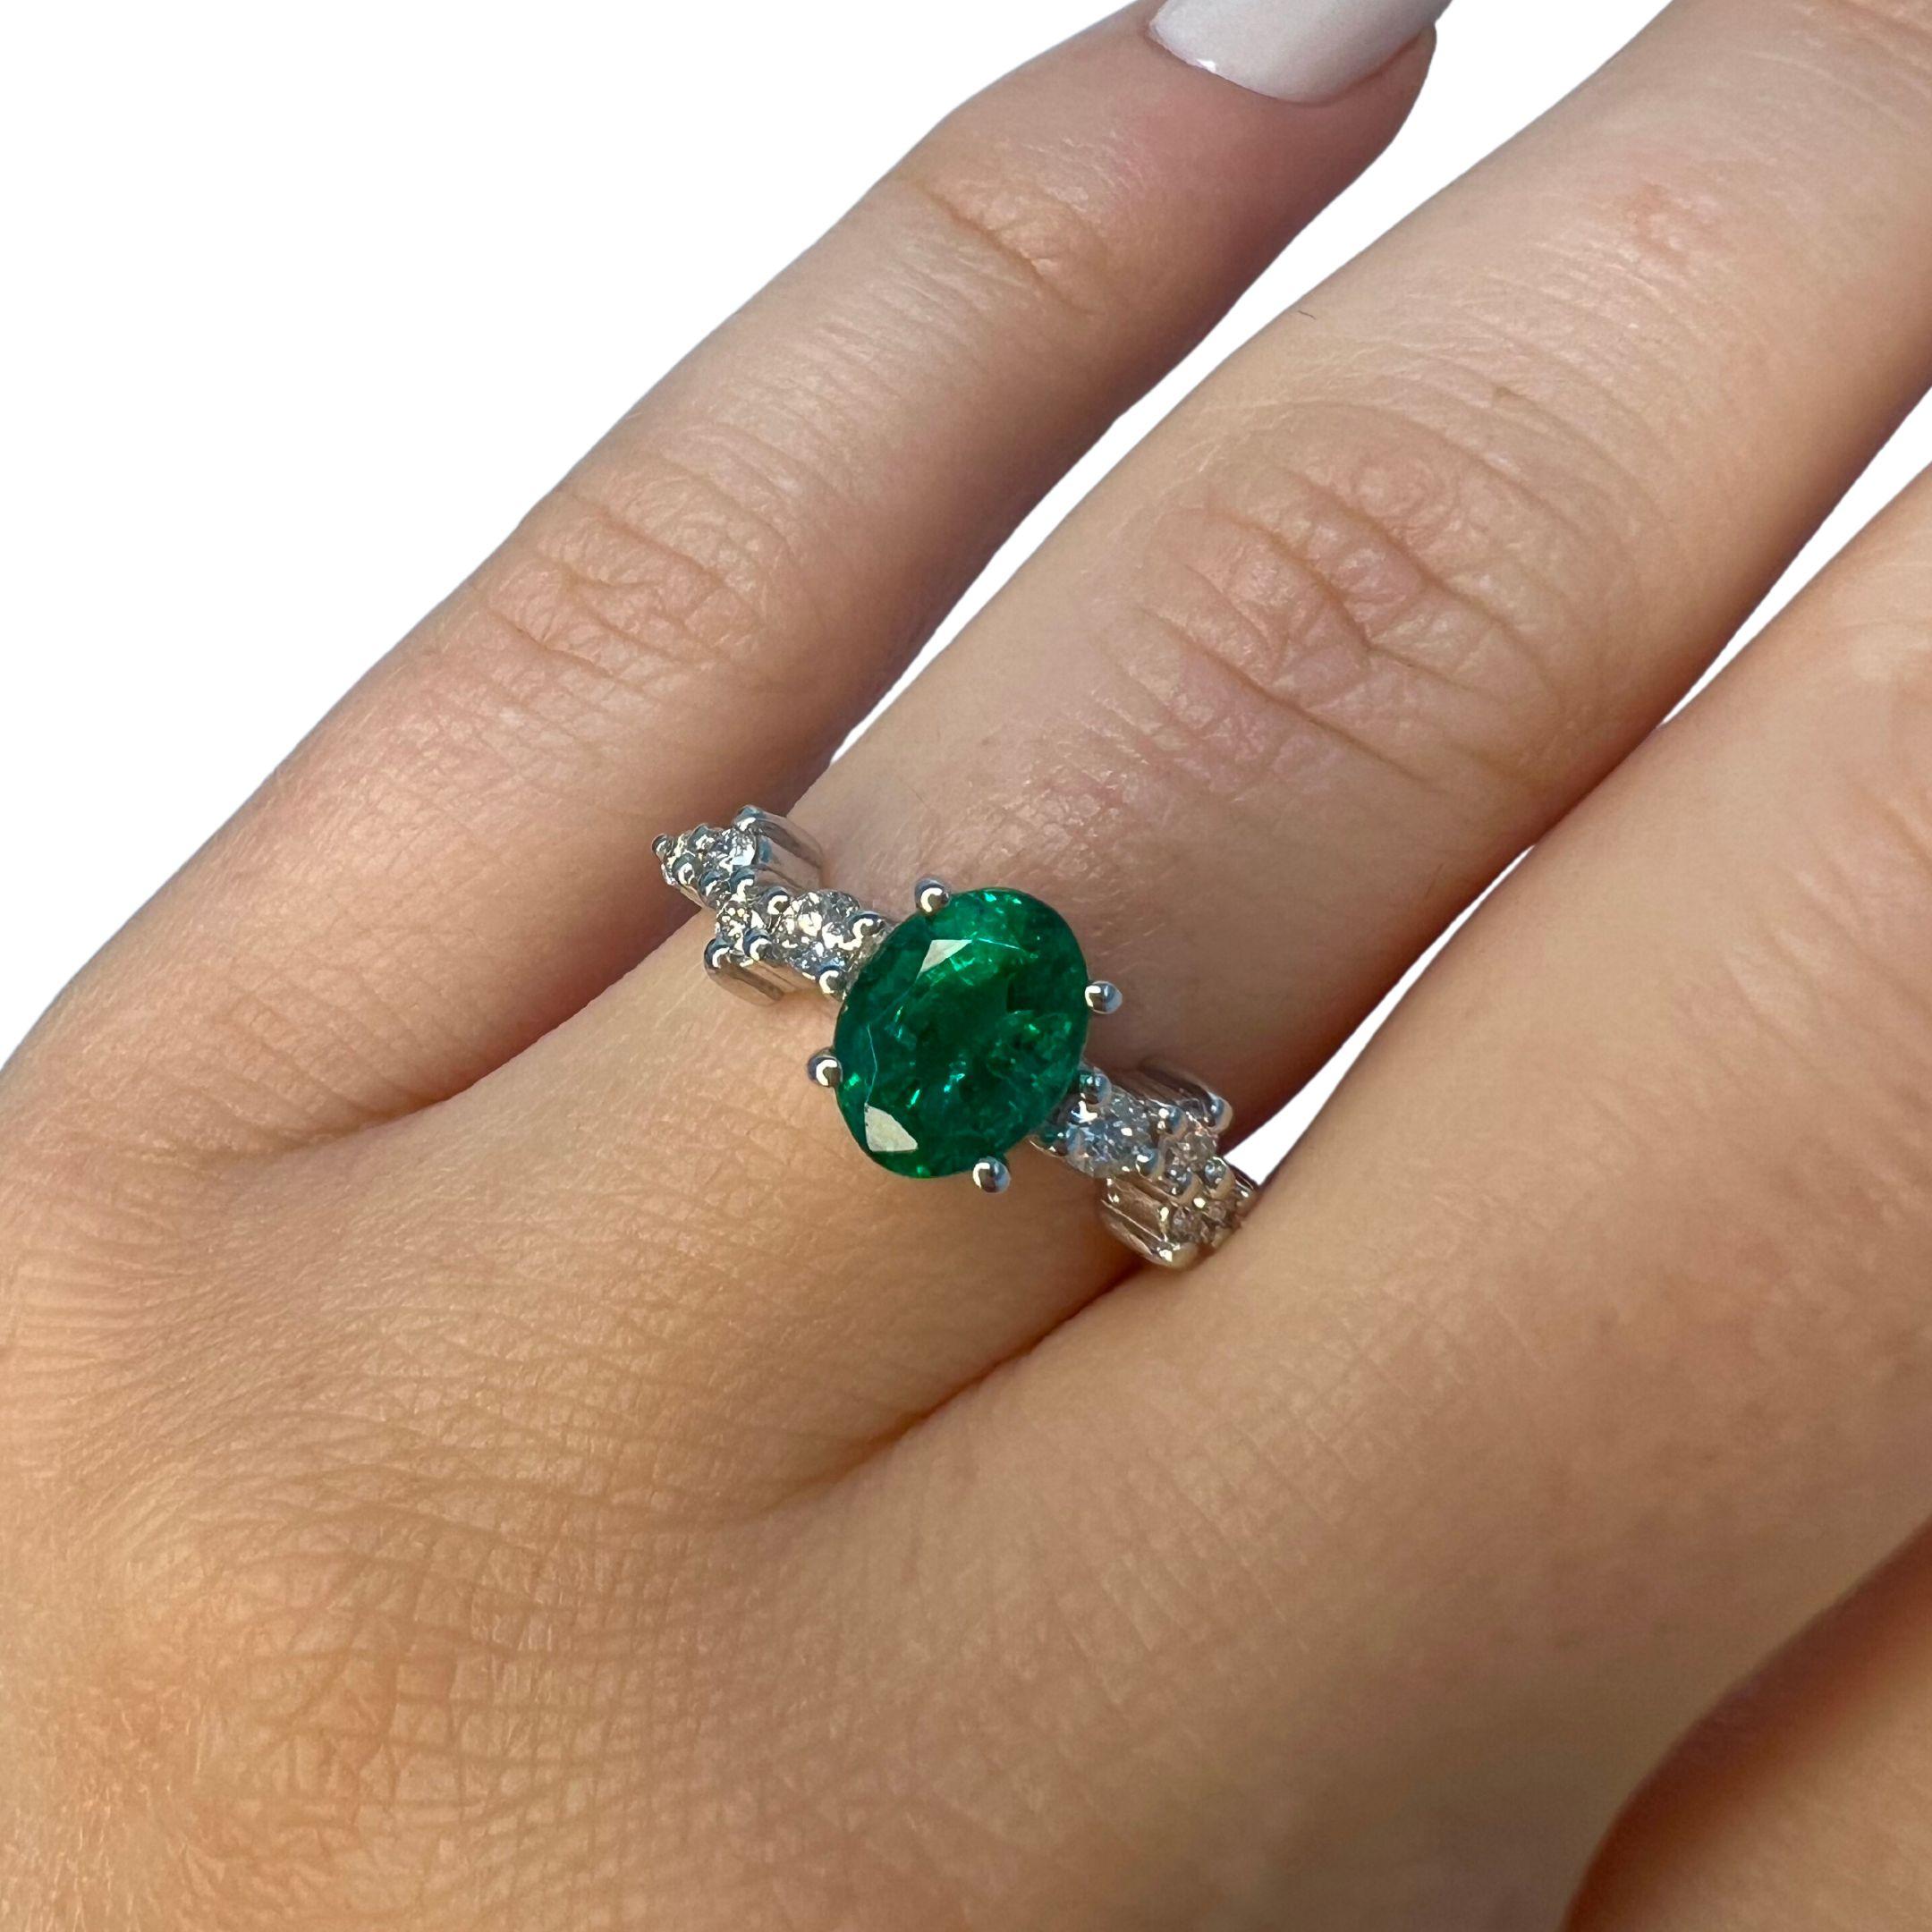 Emerald Weight: 1.31 CTs
Measurements: 8x6 mm
Diamond Weight: 0.20 CTs
Metal: 18K White Gold 
Gold Weight: 3.41 gm
Ring Size: 6.5
Shape: Oval
Color: Intense Green
Hardness: 7.5-8
Birthstone: May
Product ID: MUR25318/Line 14